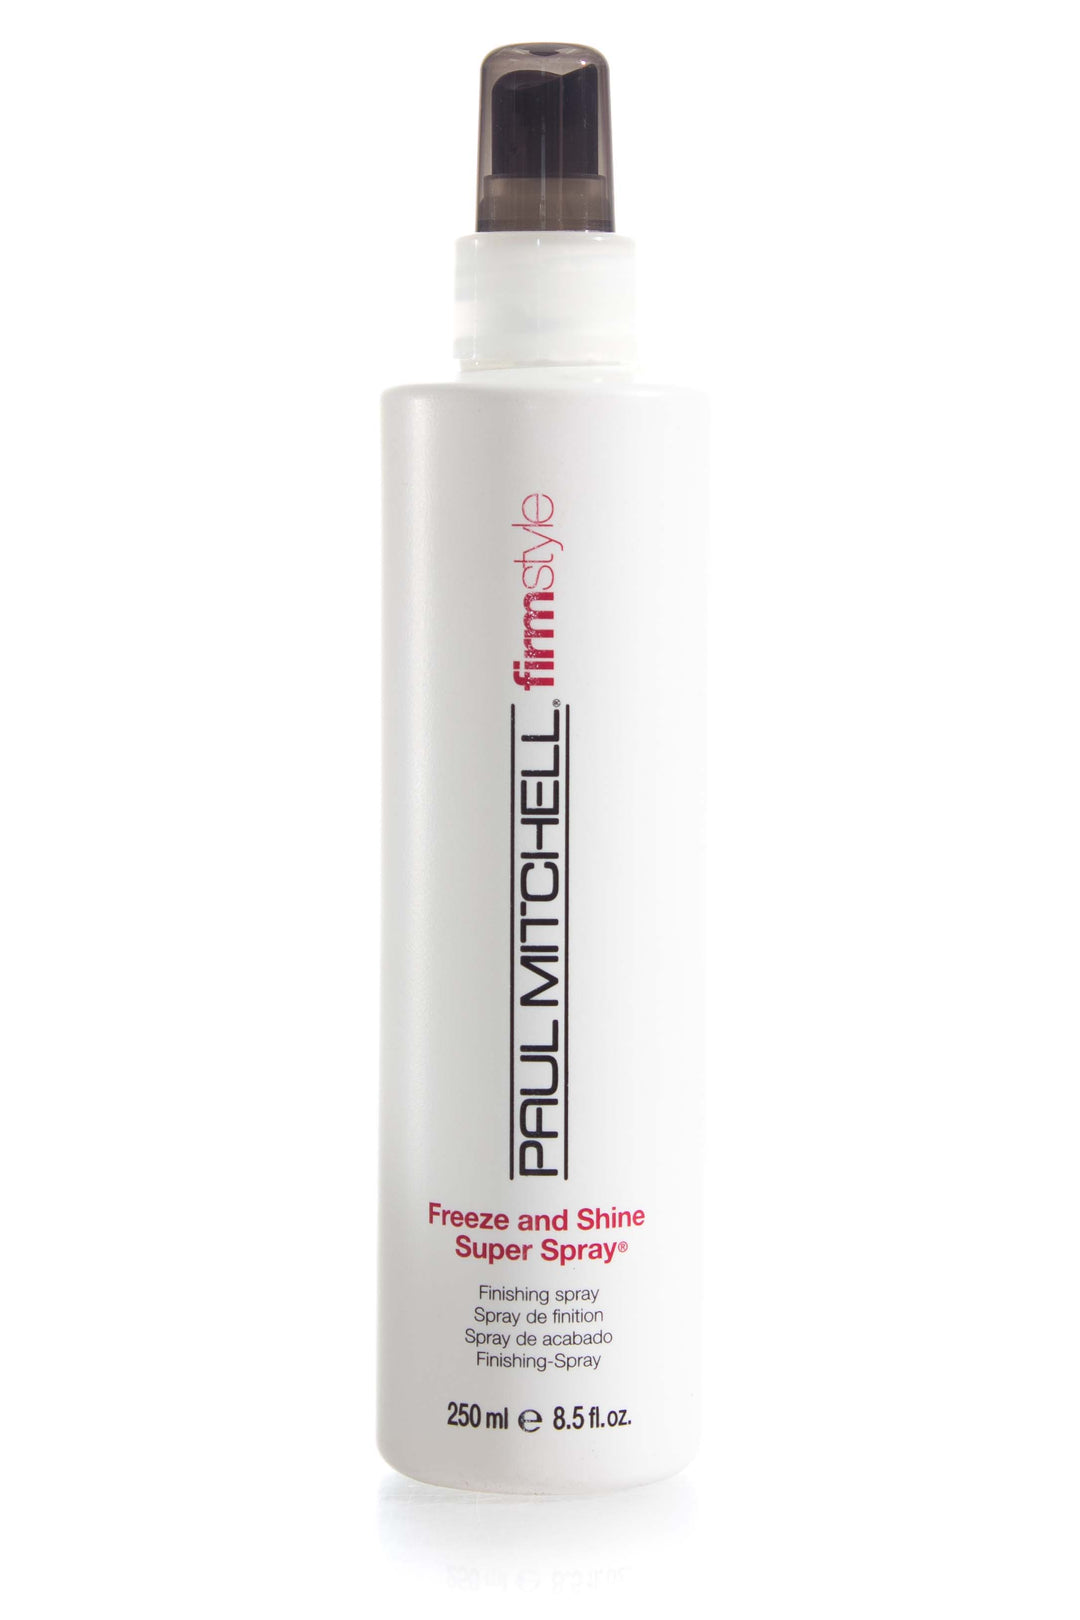 paul-mitchell-firm-style-freeze-and-shine-super-spray-250ml